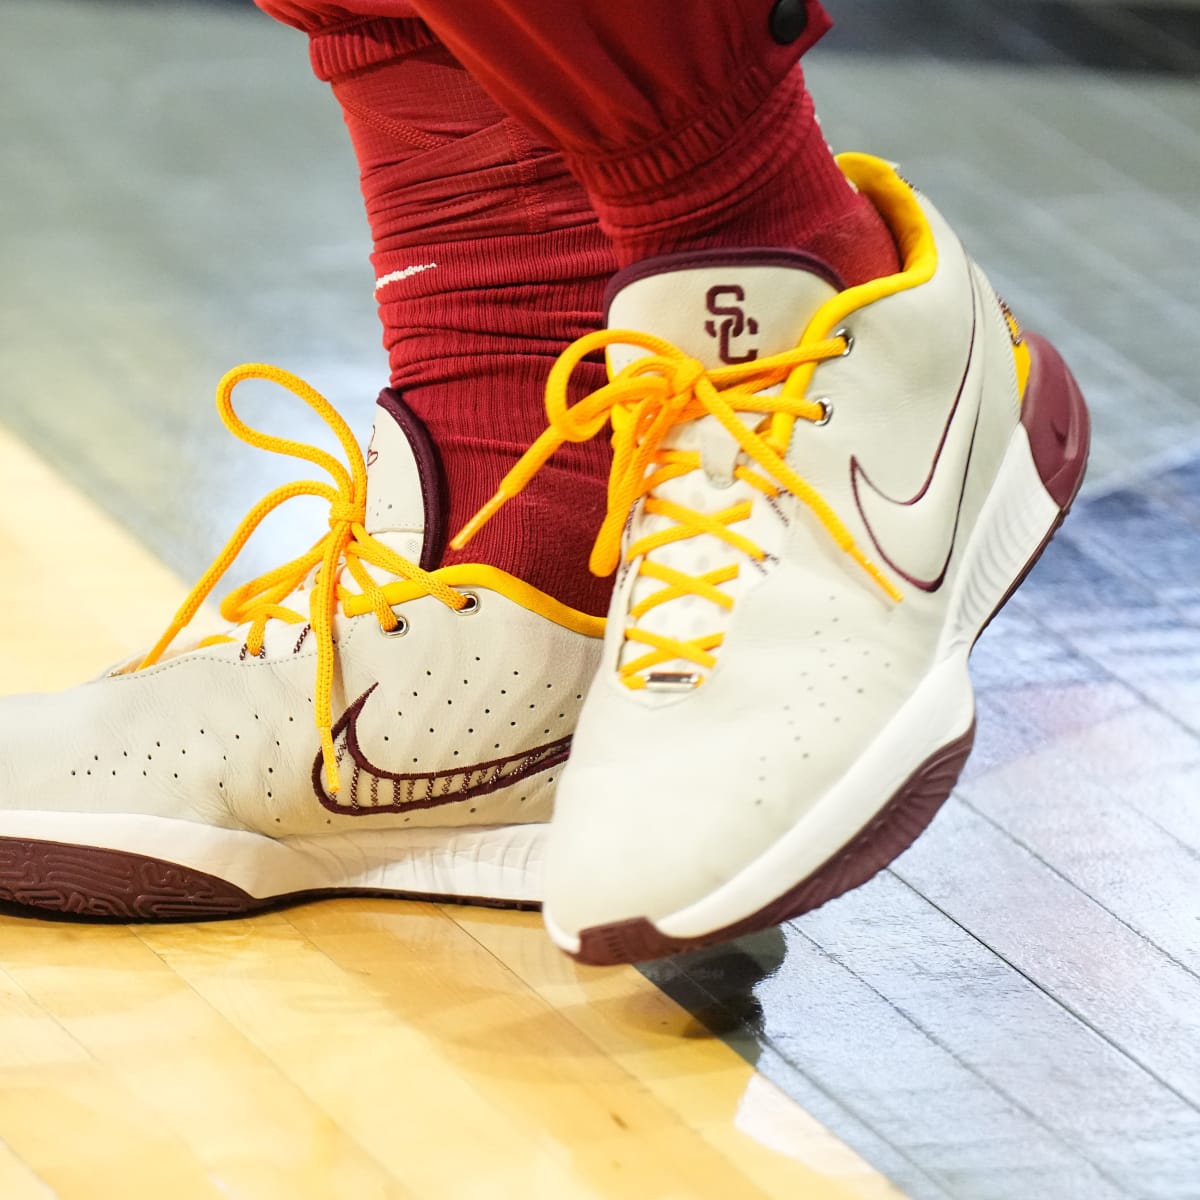 Bronny James Makes First Start in Nike LeBron 21 'USC Trojans' - Sports Illustrated FanNation Kicks News, Analysis and More